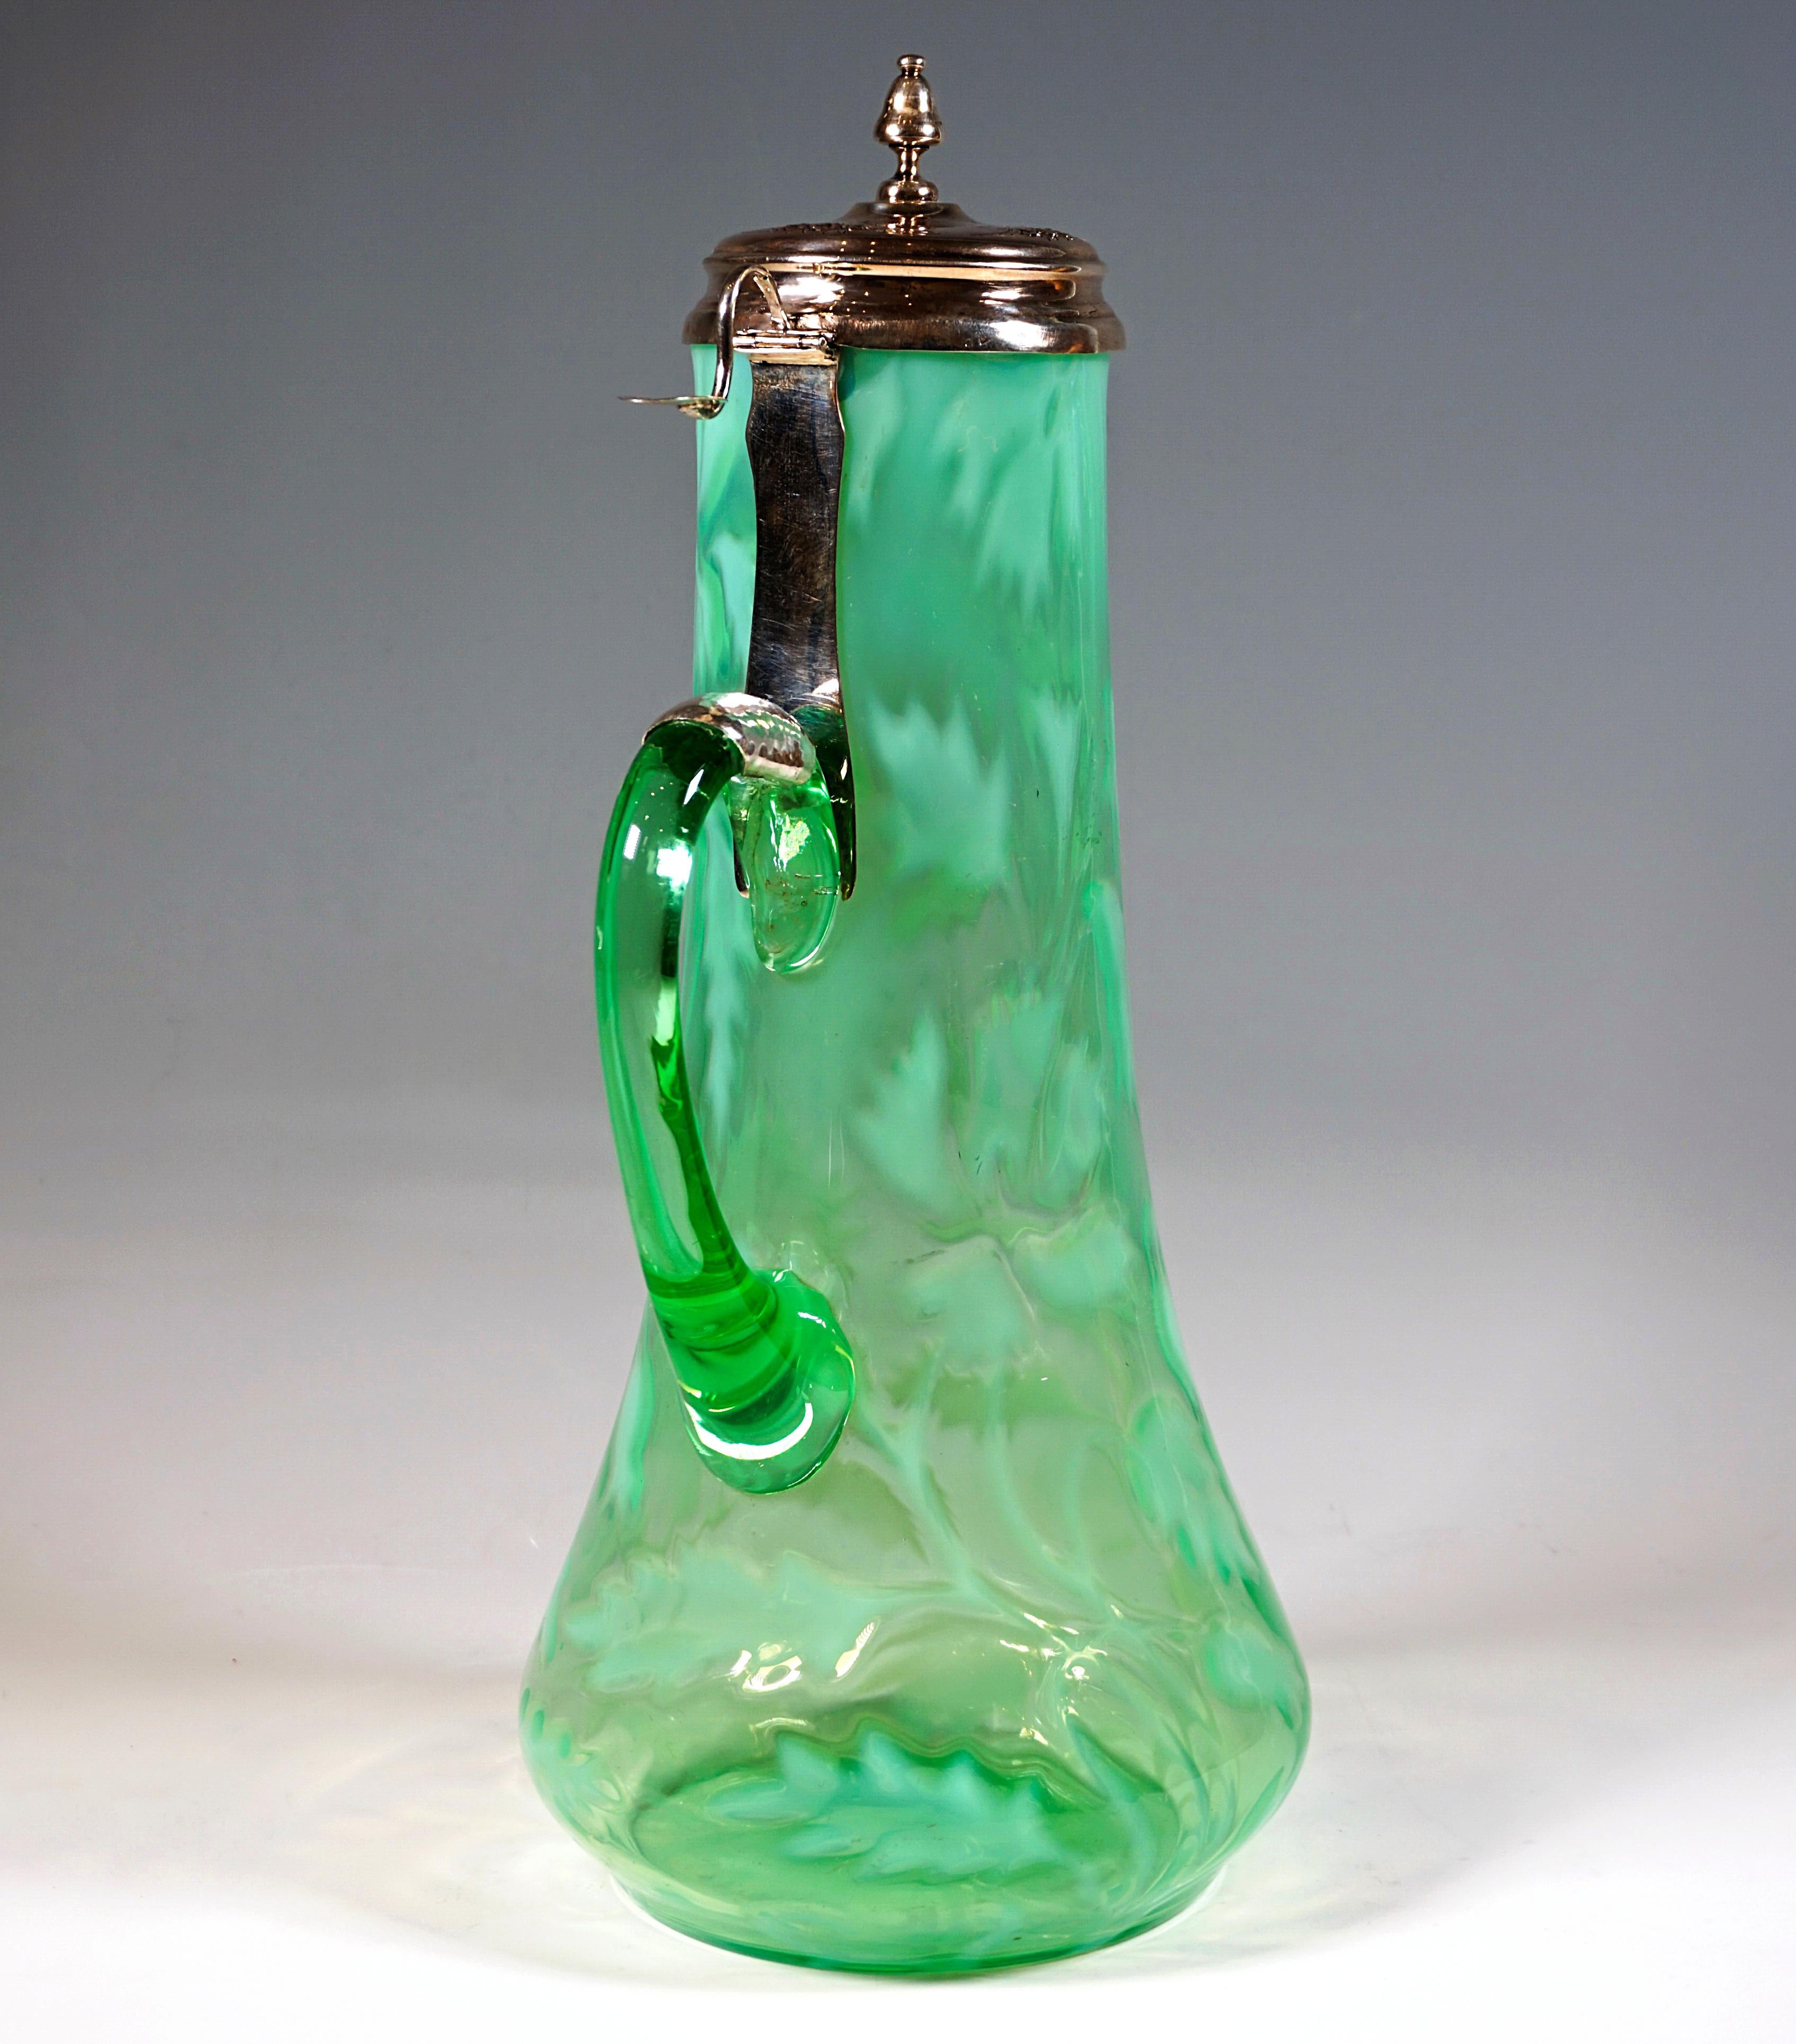 Portuguese Art Nouveau Carafe, Green Glass with Opaline & Silver Mount, Porto, Around 1900 For Sale